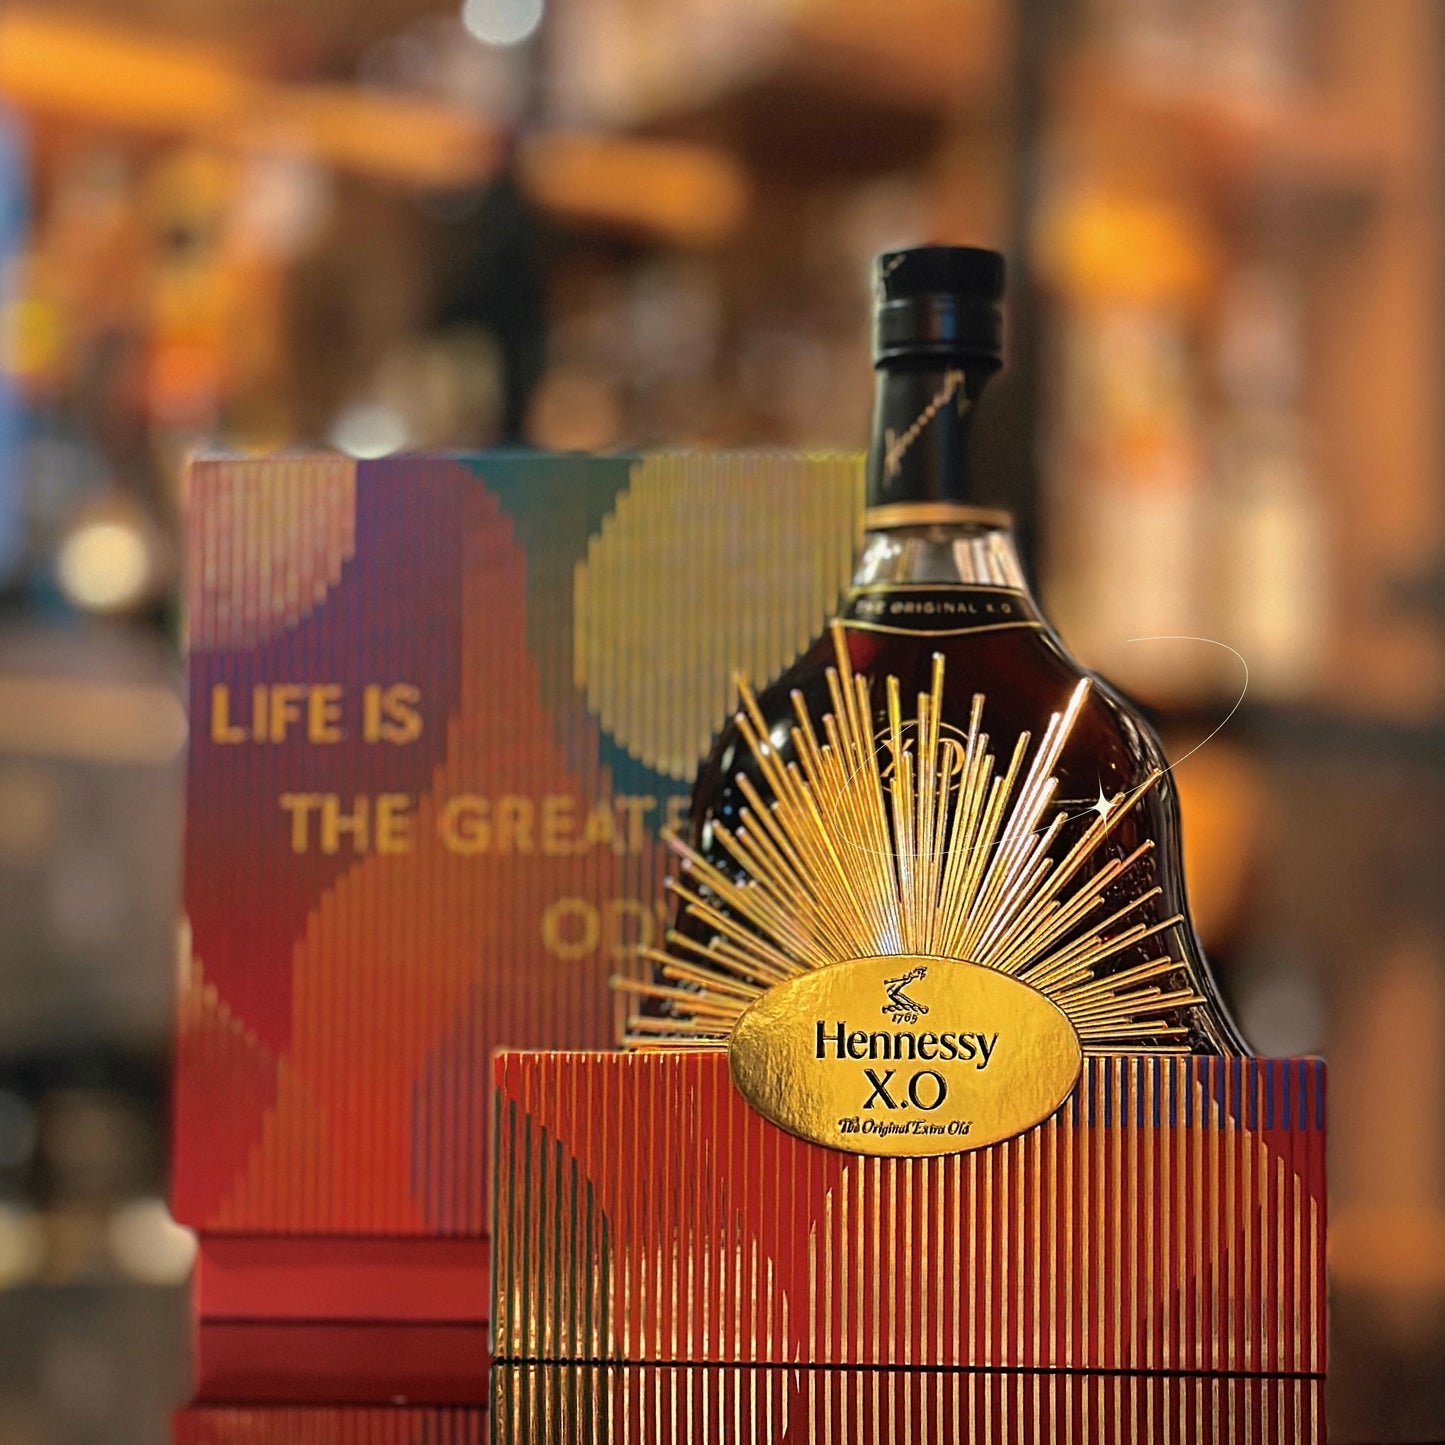 Hennessy X.O Cognac “Life is the Greatest Odyssey” Limited Edition